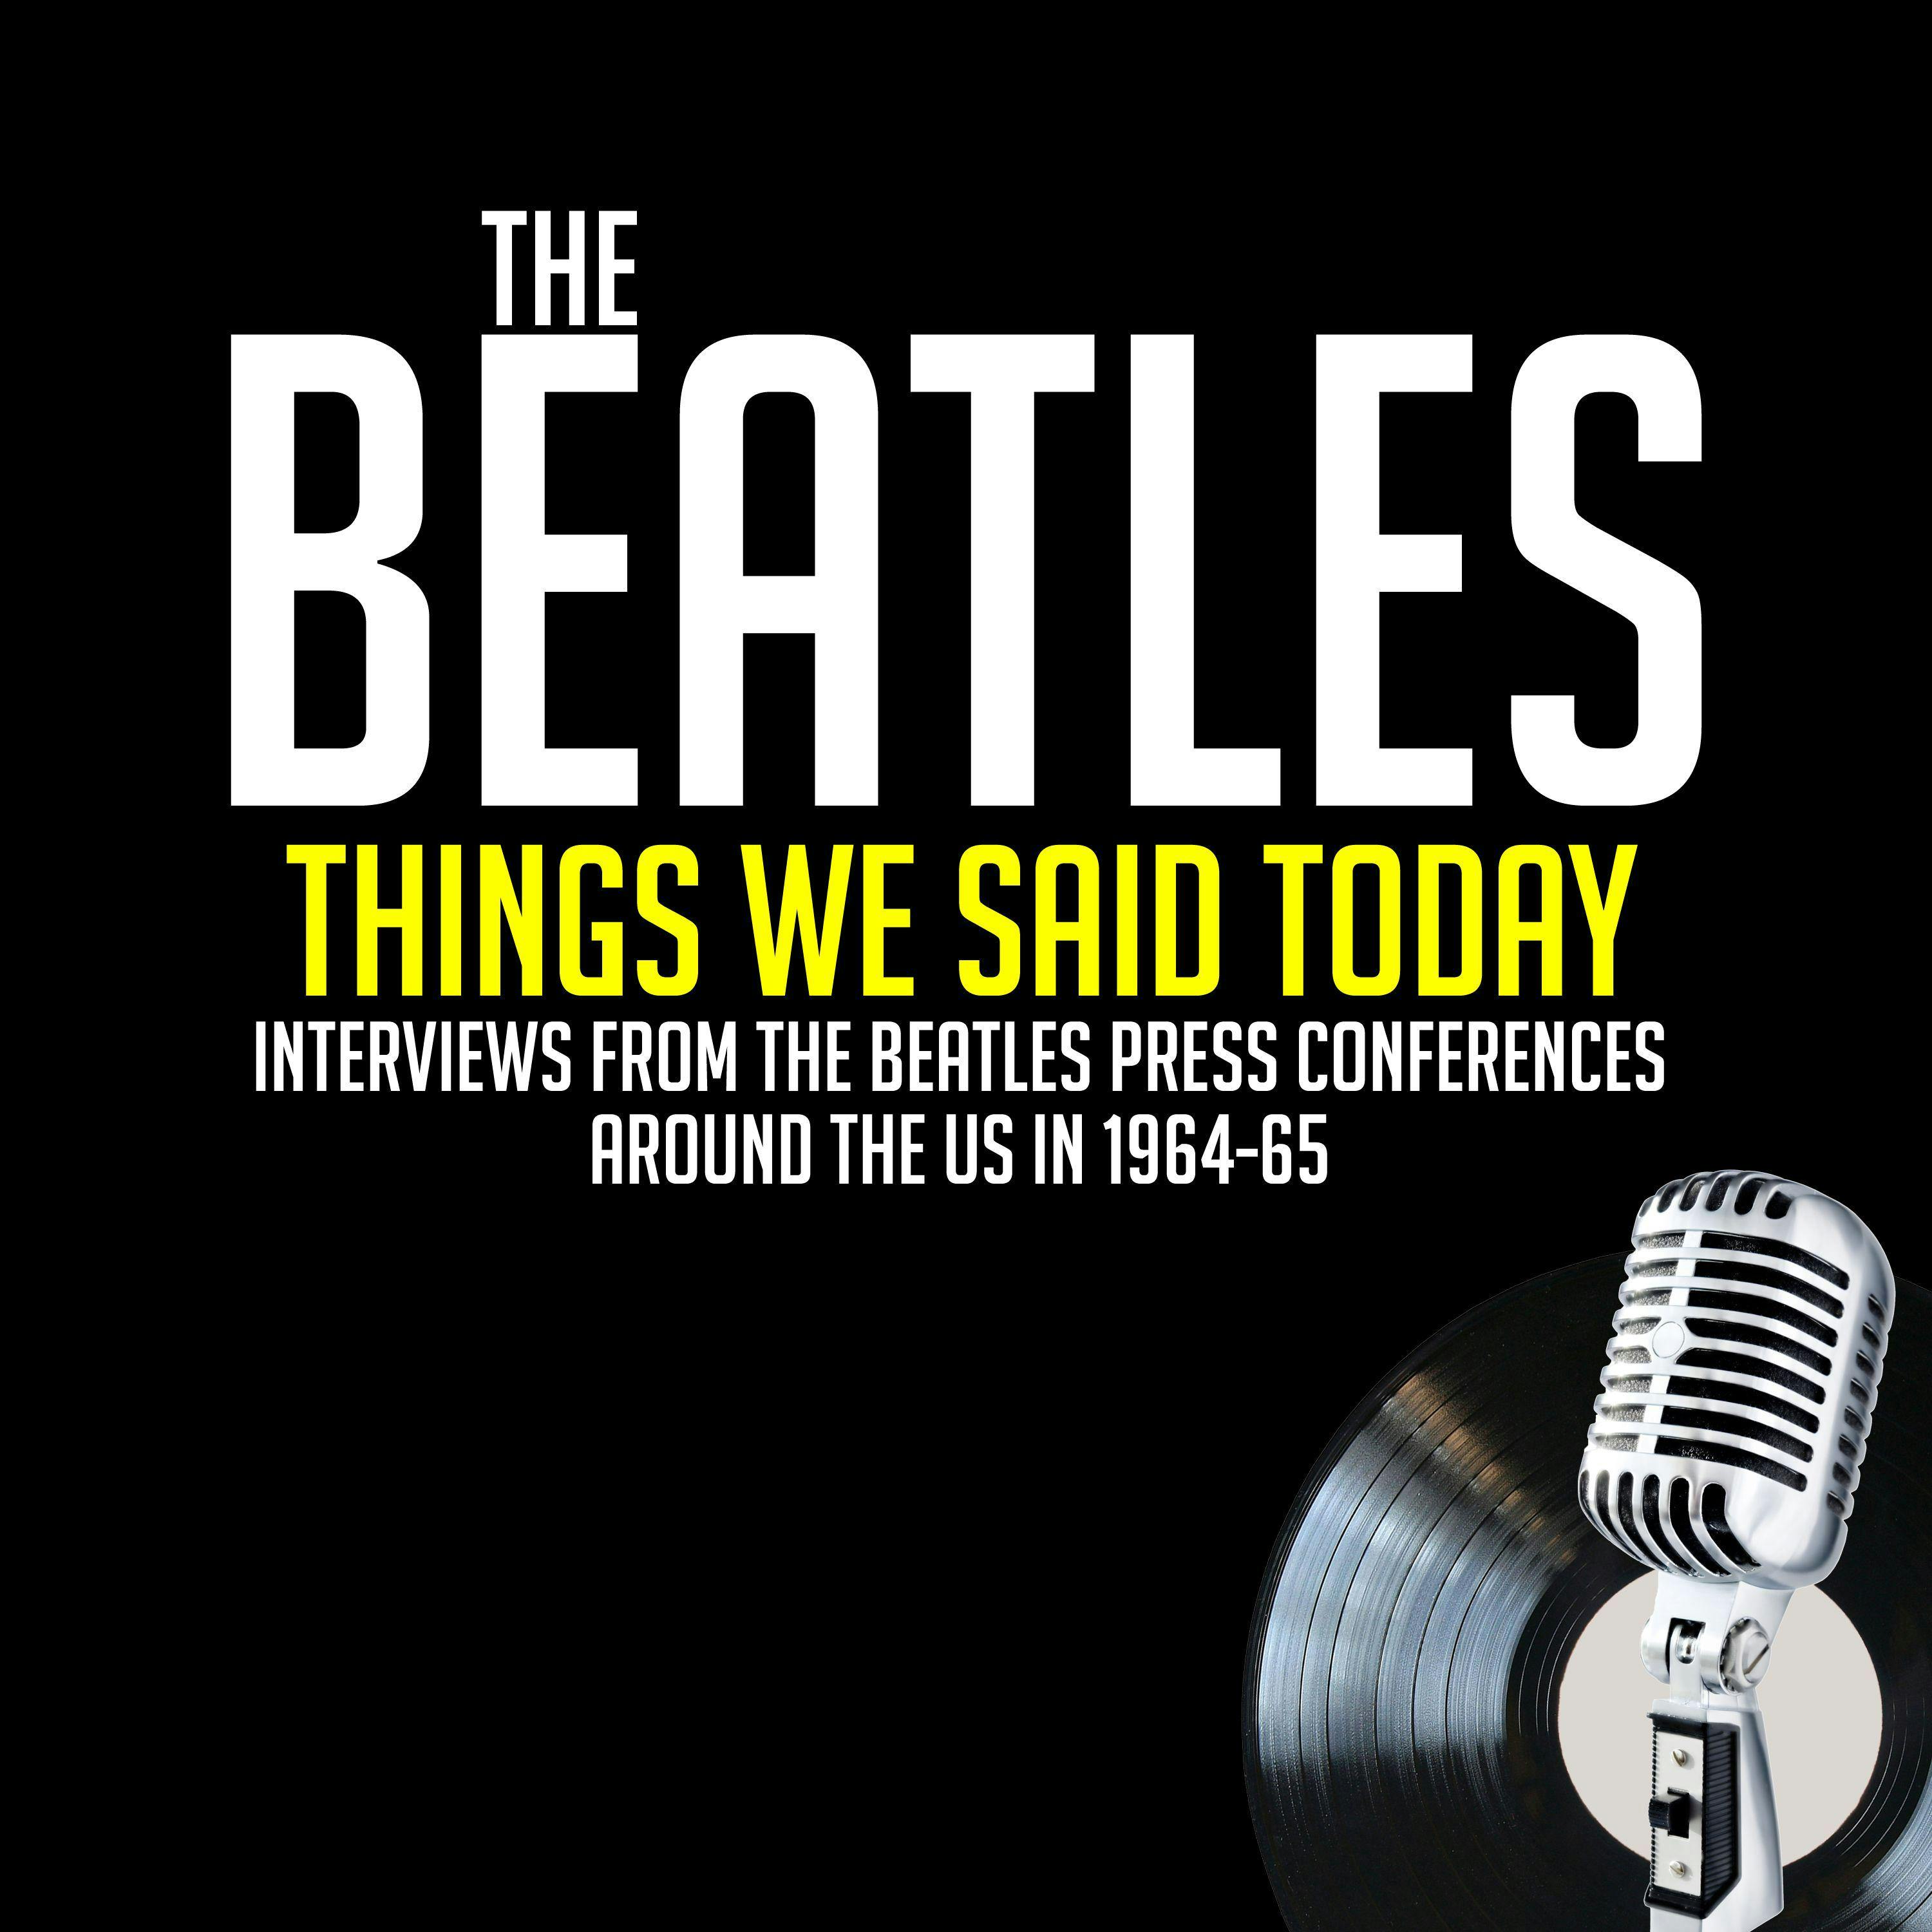 Things We Said Today: Interviews from The Beatles Press Conferences Around the US in 1964-65 - George Harrison, John Lennon, Larry Kane, Jean Morris, Ringo Starr, Paul McCartney